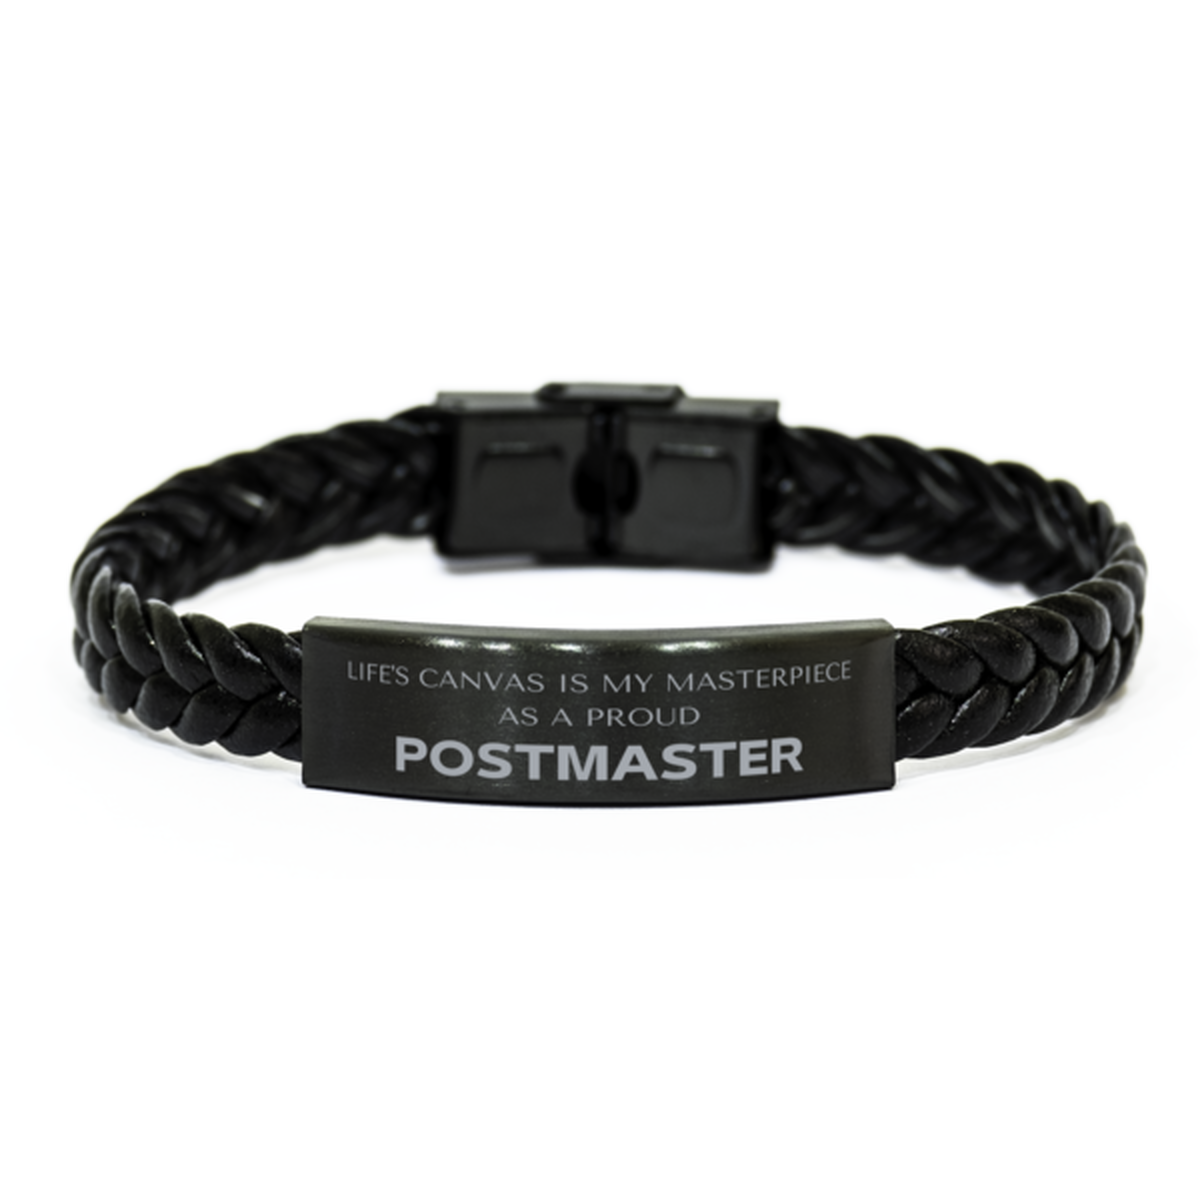 Proud Postmaster Gifts, Life's canvas is my masterpiece, Epic Birthday Christmas Unique Braided Leather Bracelet For Postmaster, Coworkers, Men, Women, Friends